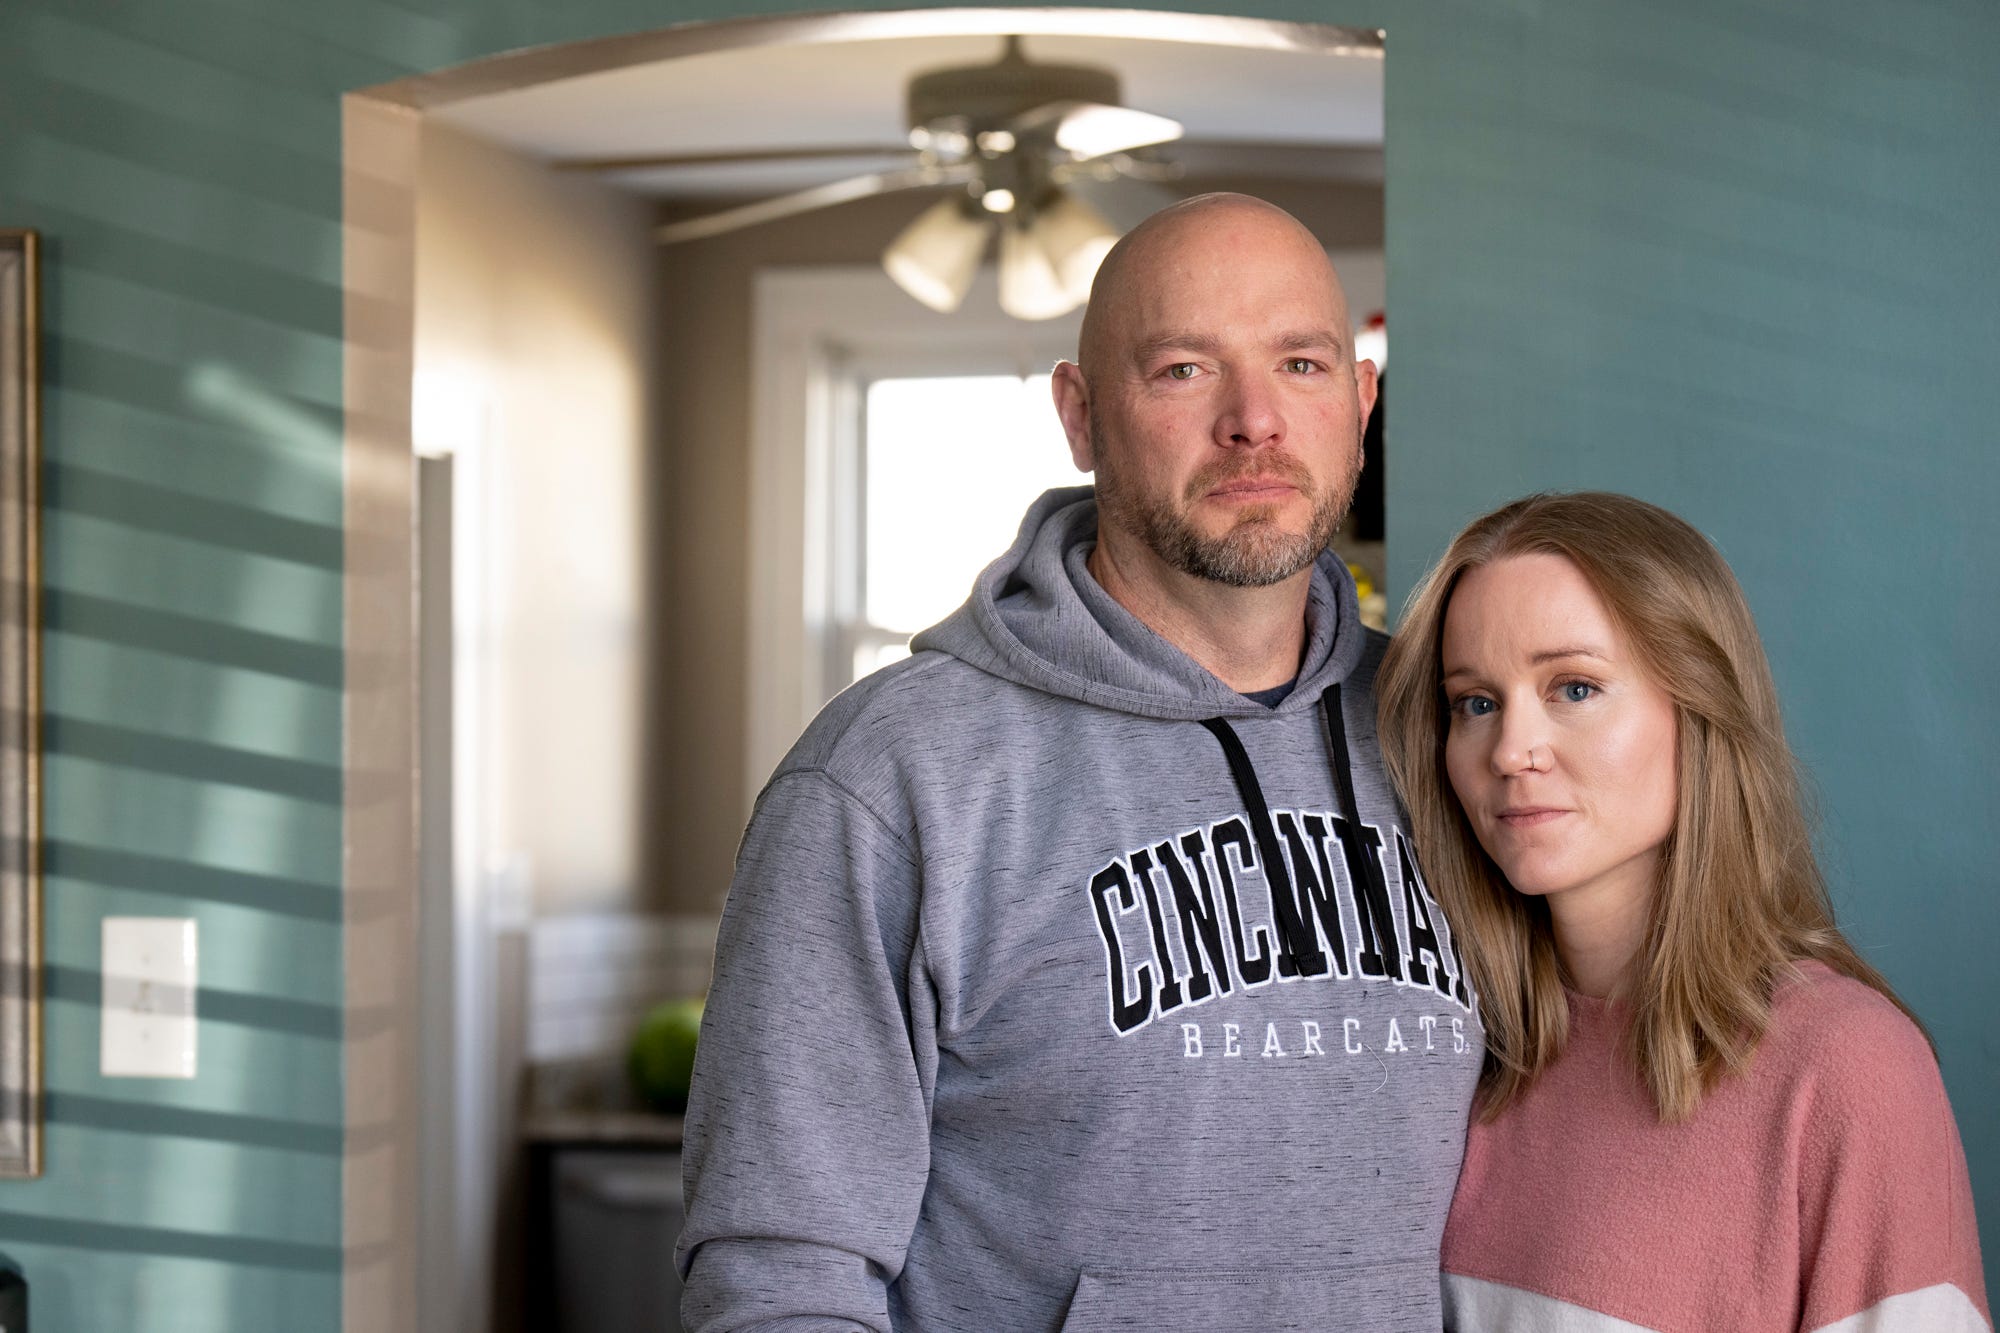 Paul Neyer and his wife, Liesl, stand inside their home on Sunday, Feb. 12, 2023. Paul Neyer decided to come forward with abuse allegations against Father Geoff Drew almost 30 years after he was abused. 